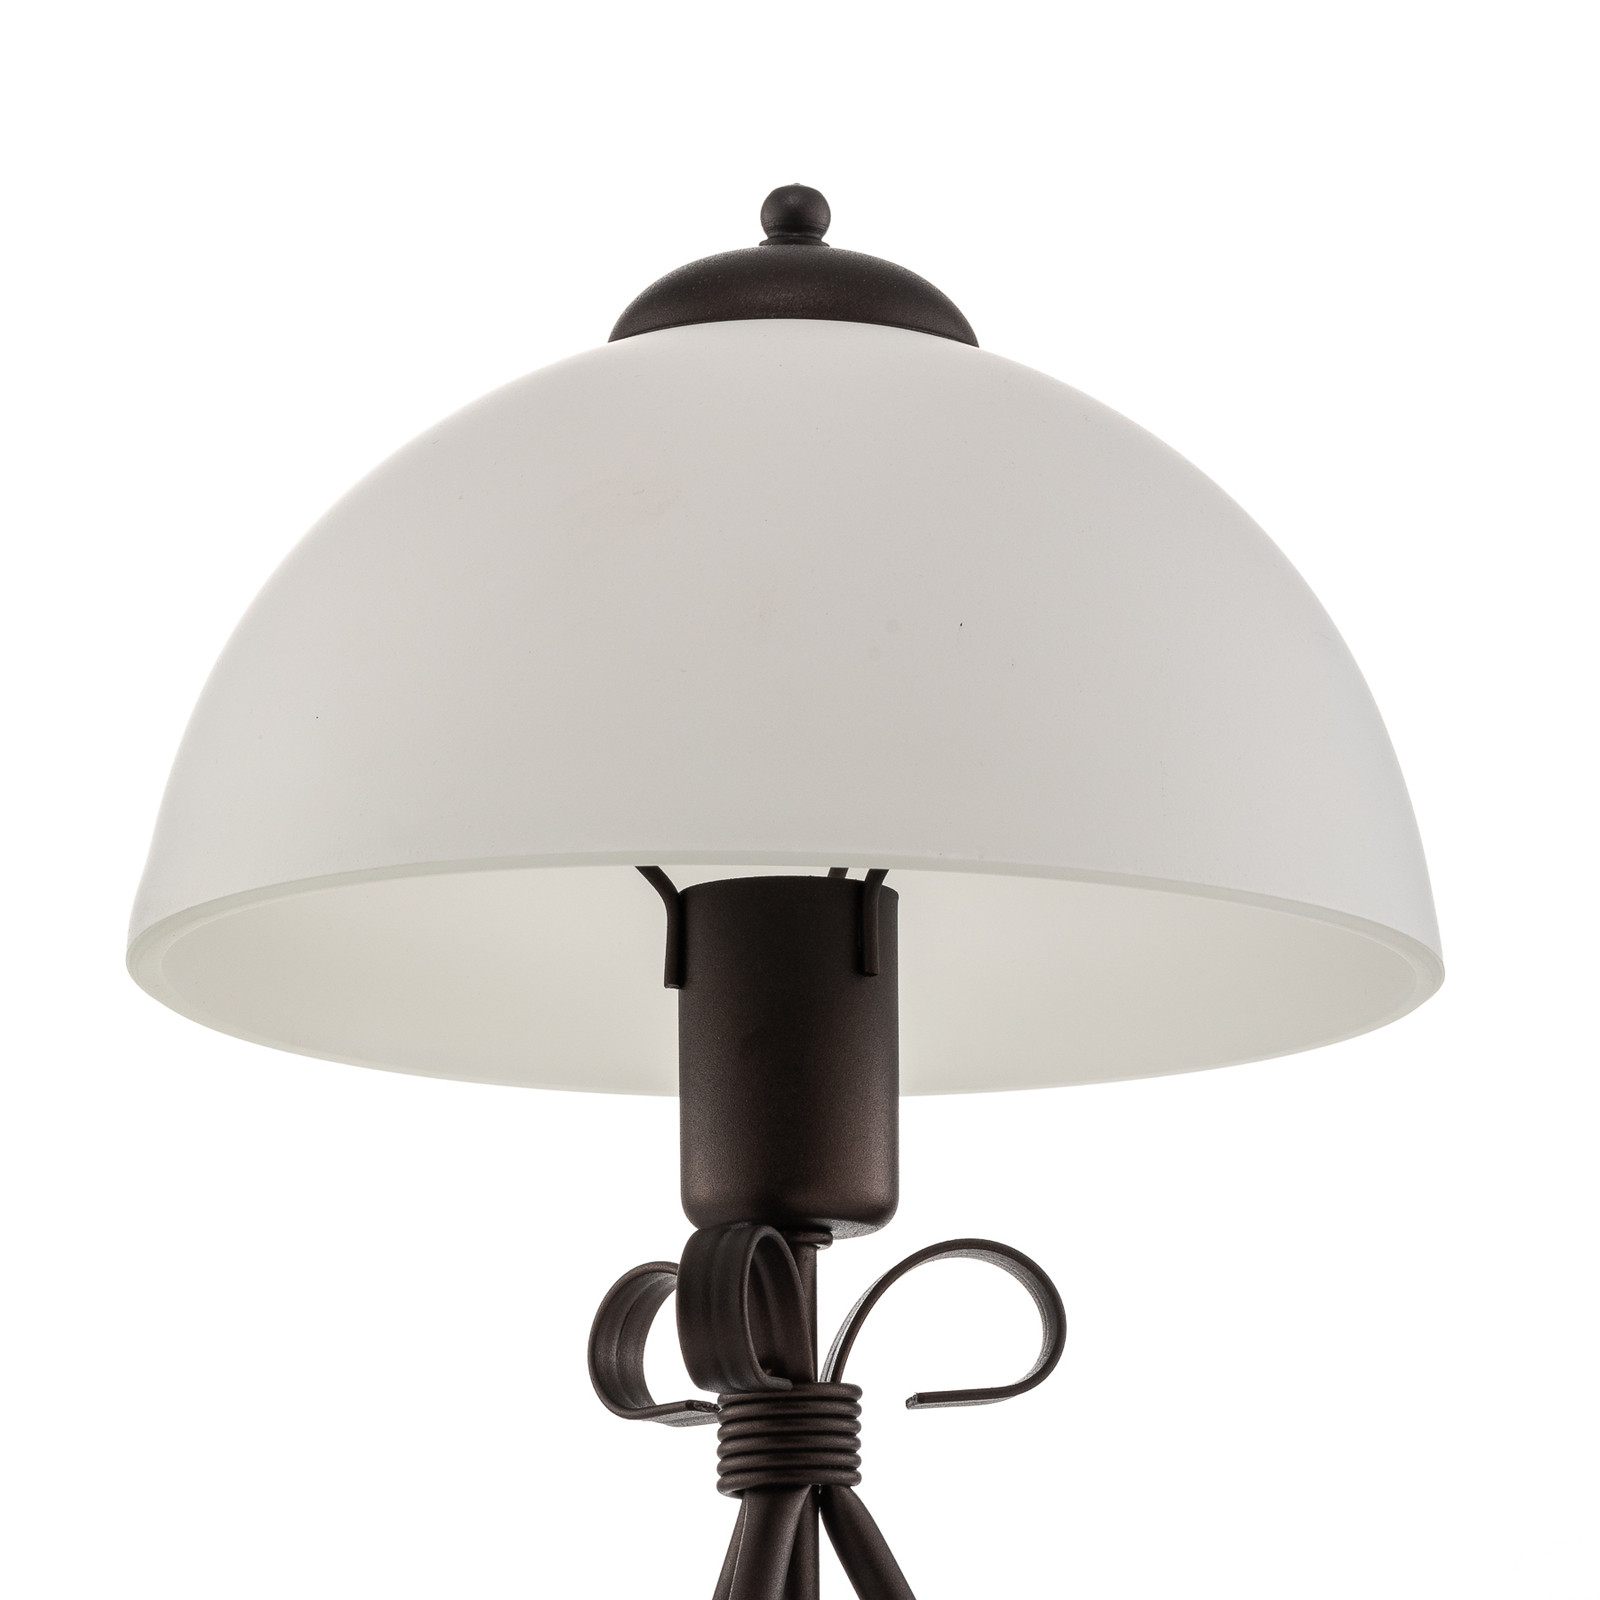 Adoro table lamp with a glass lampshade, brown